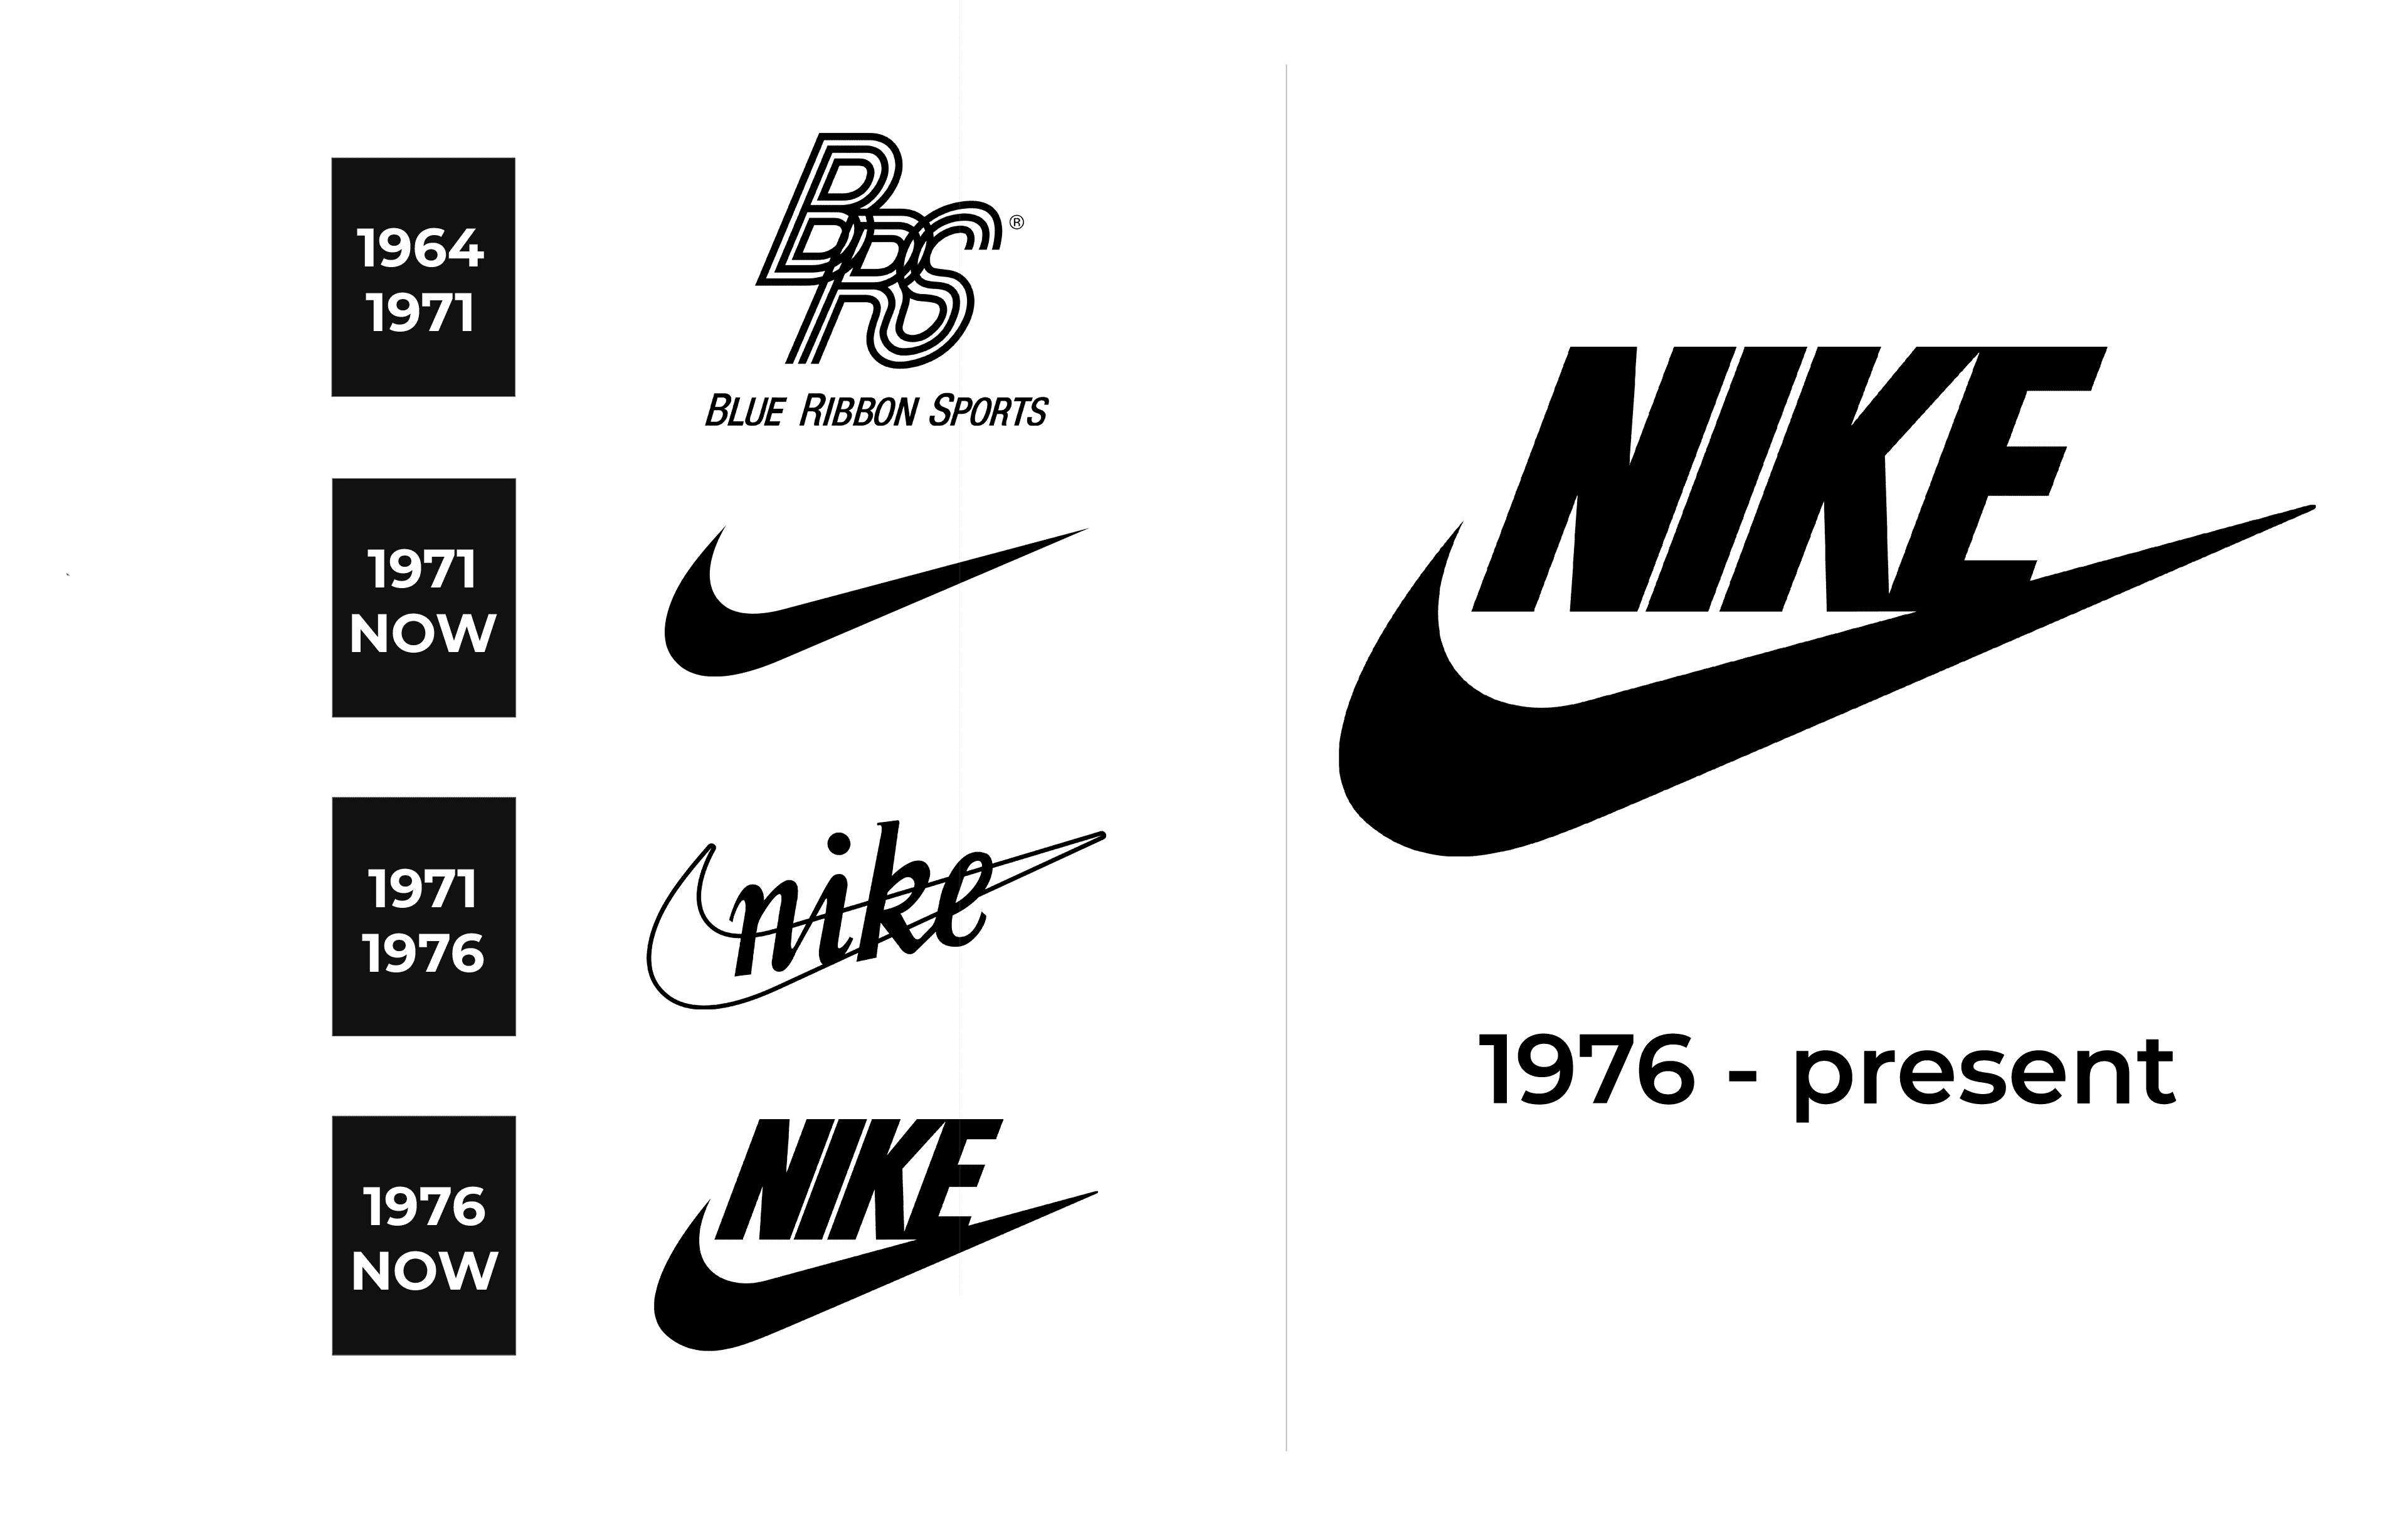 What Does the Nike Logo Mean?